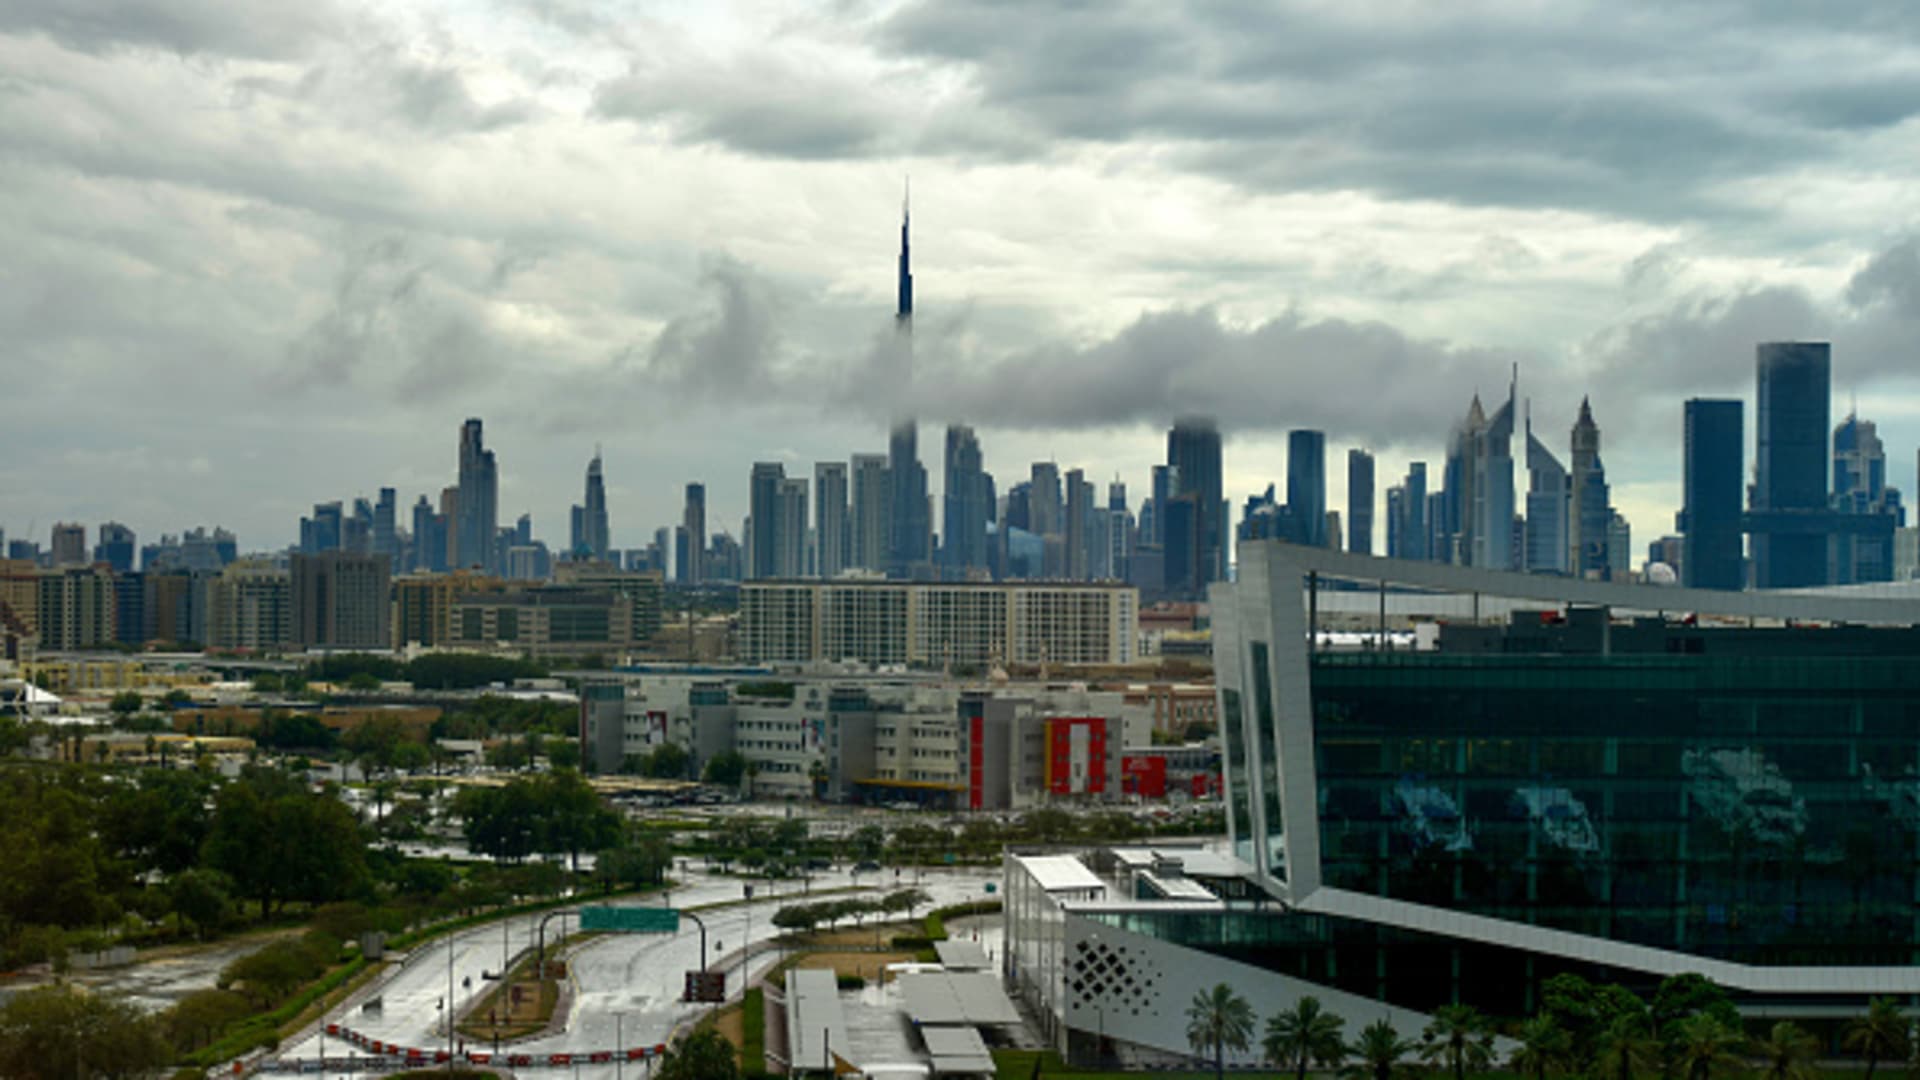 A view of the street after heavy rainfall as adverse weather conditions affect daily life in Dubai.